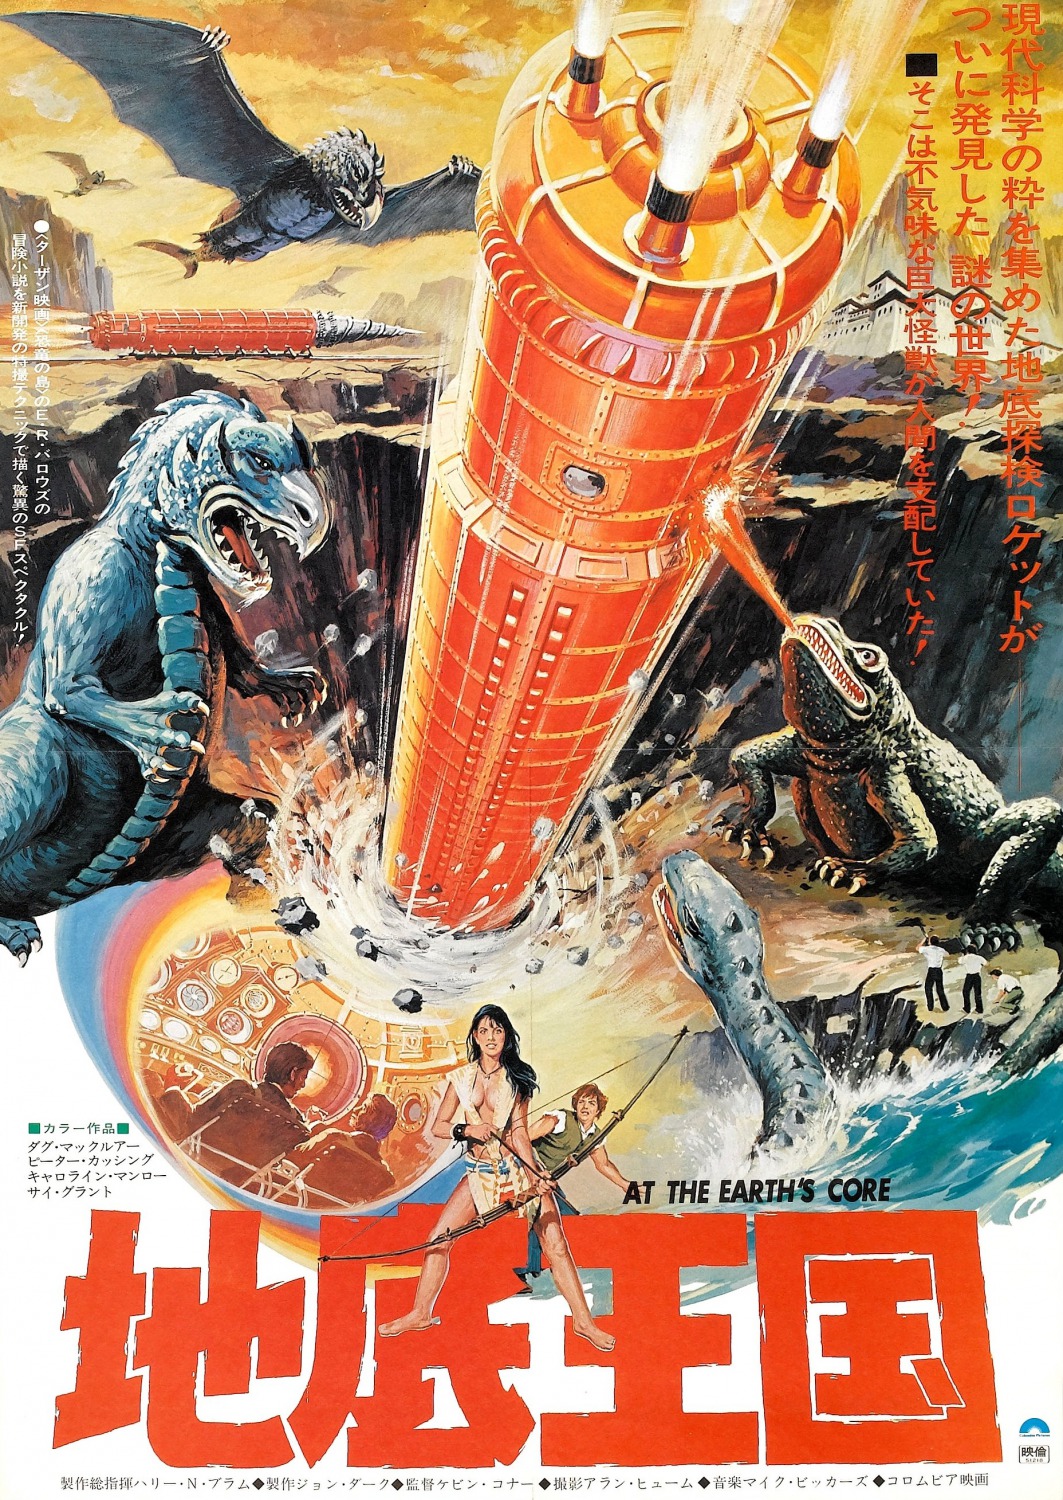 Extra Large Movie Poster Image for At the Earth's Core (#2 of 2)